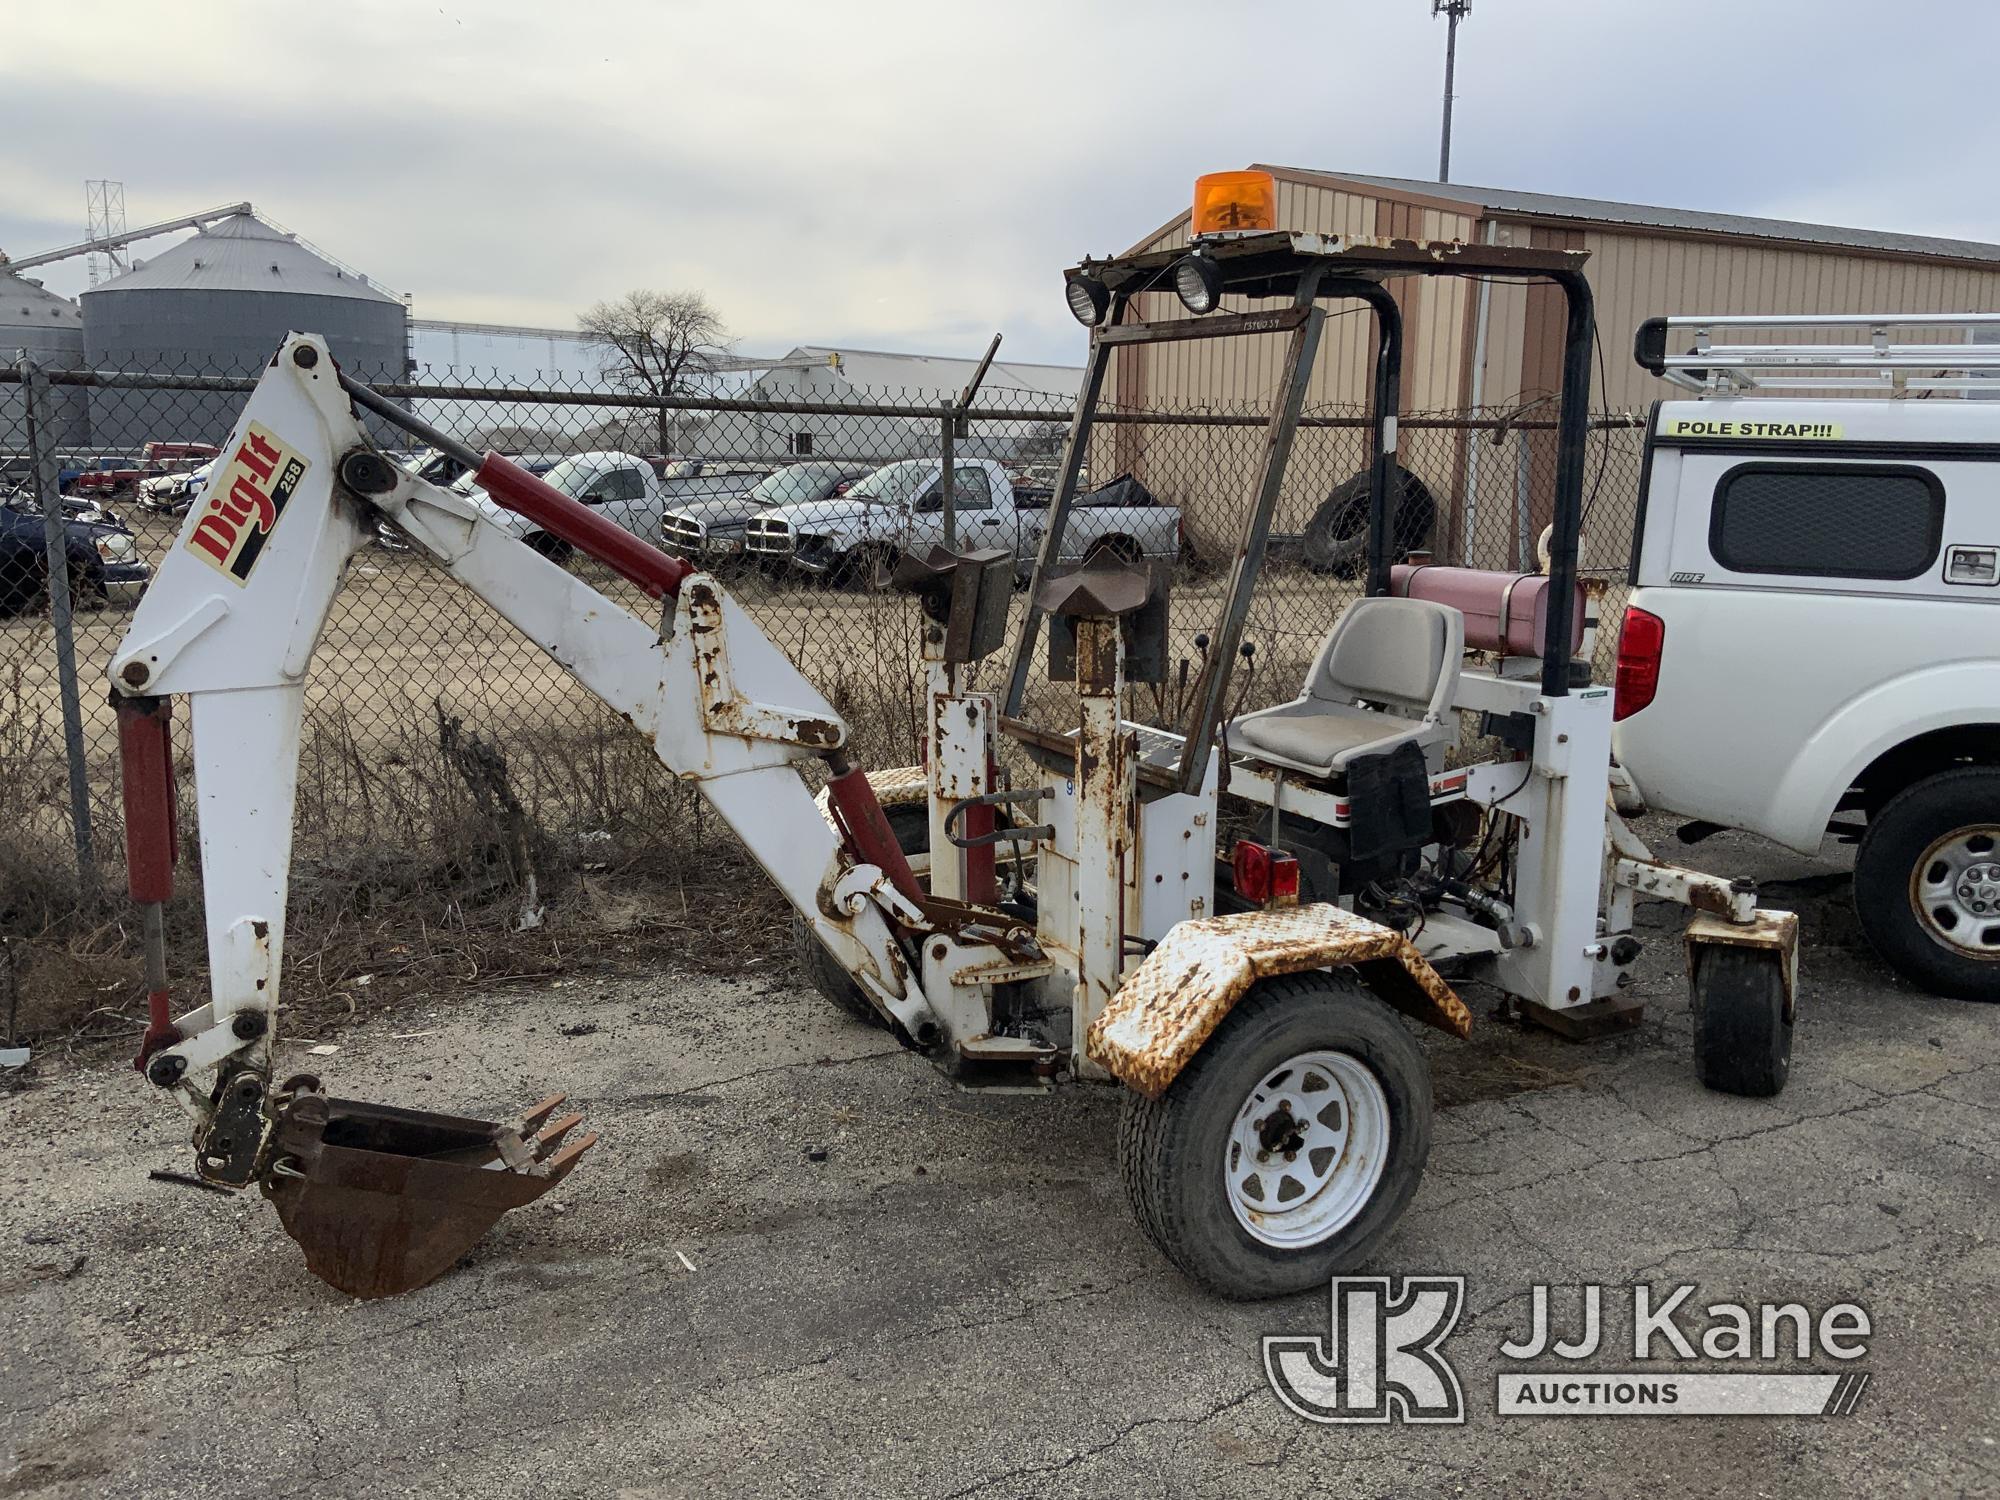 (South Beloit, IL) 2000 Dig-It 258 Mobile Tool 70030 Portable Backhoe Not Running, Condition Unknown